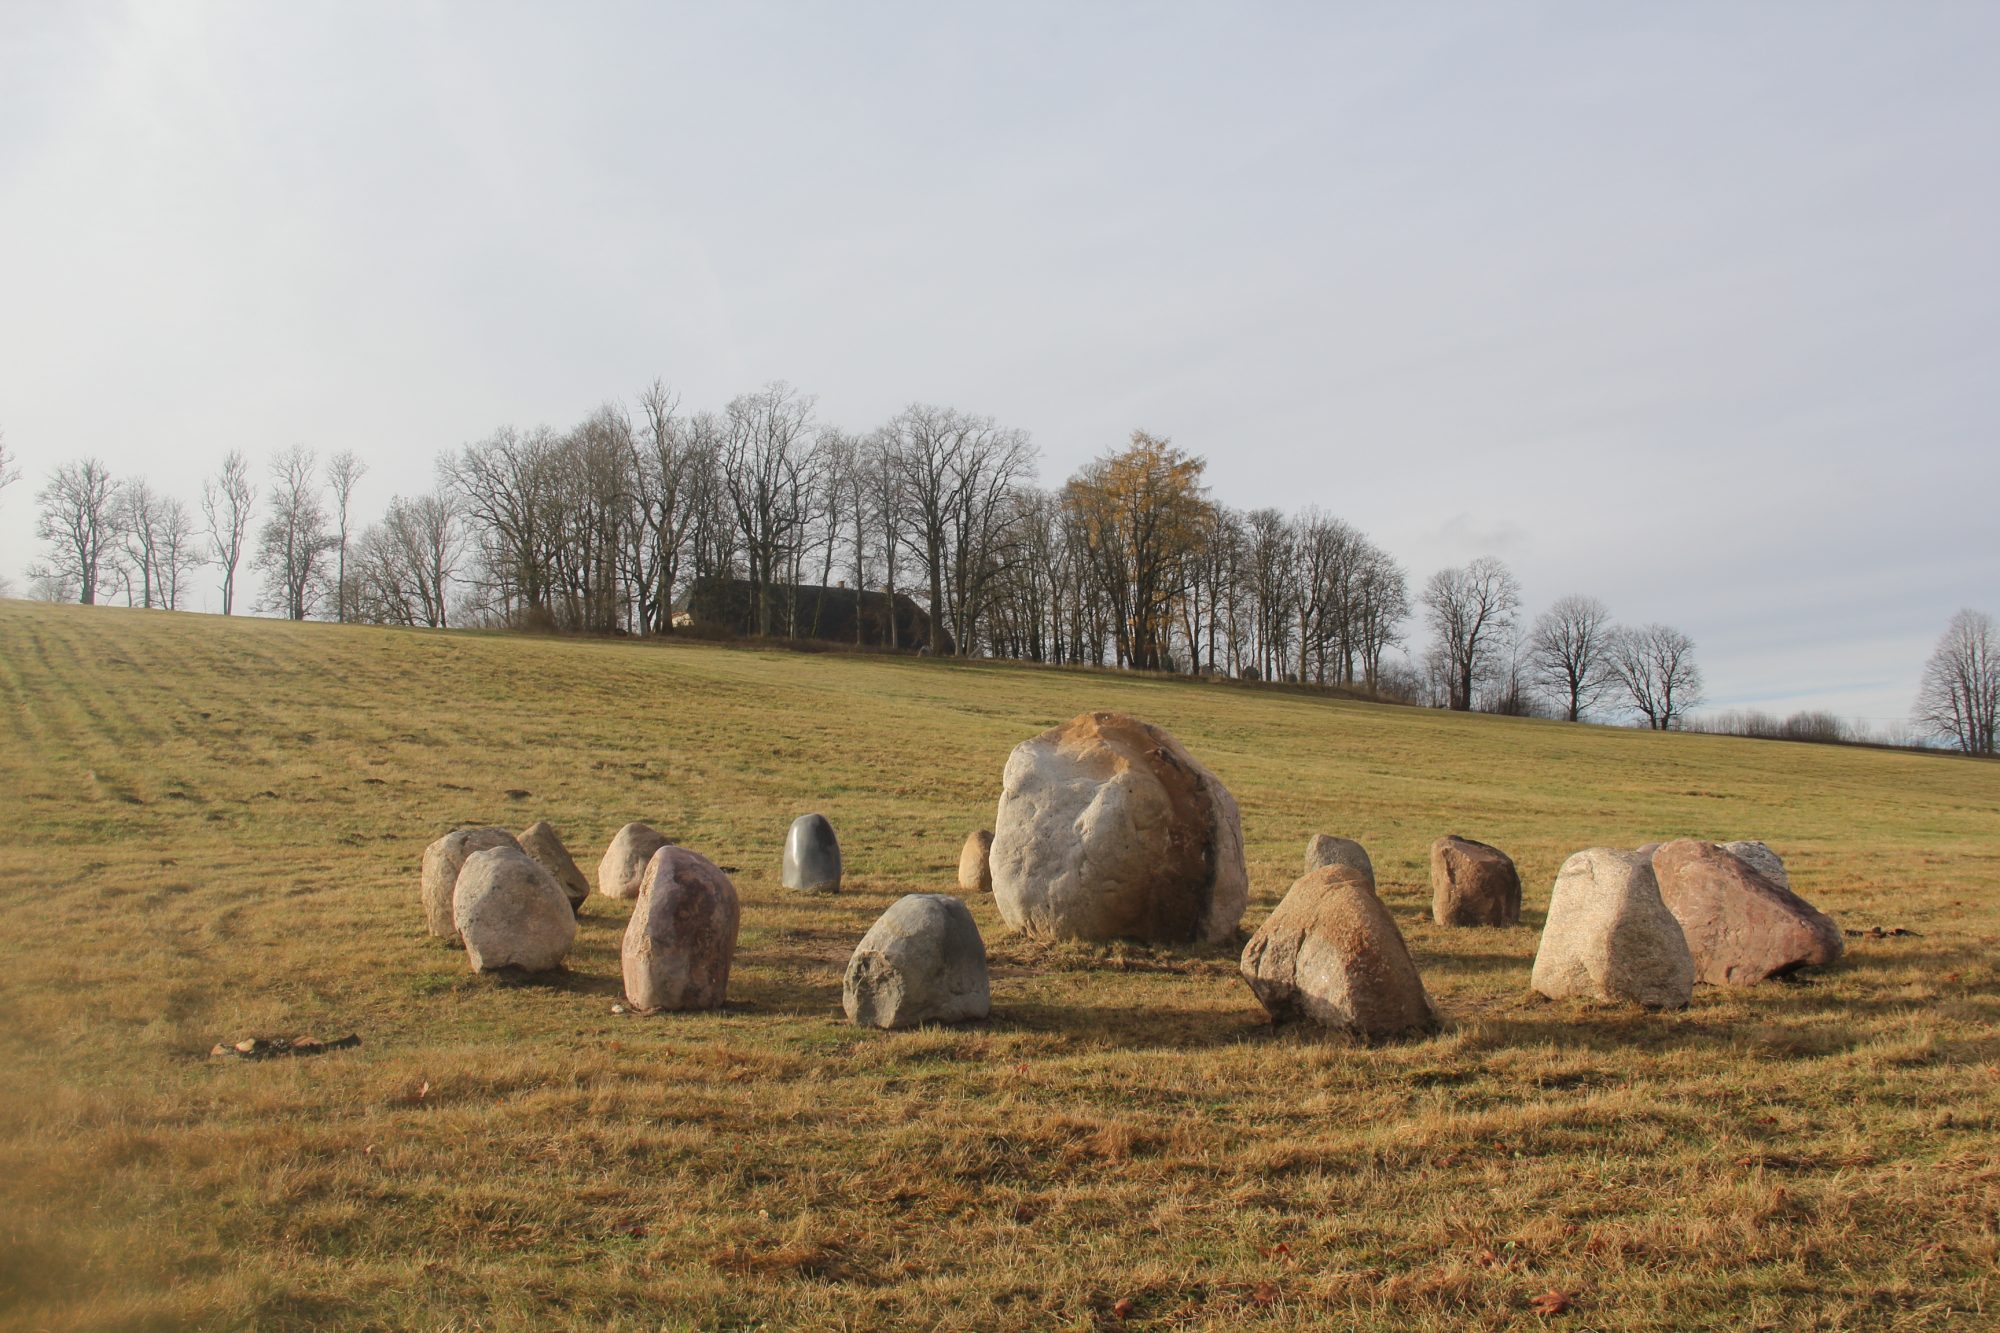 Environmental art object “The Ring of Sabile” unveiled